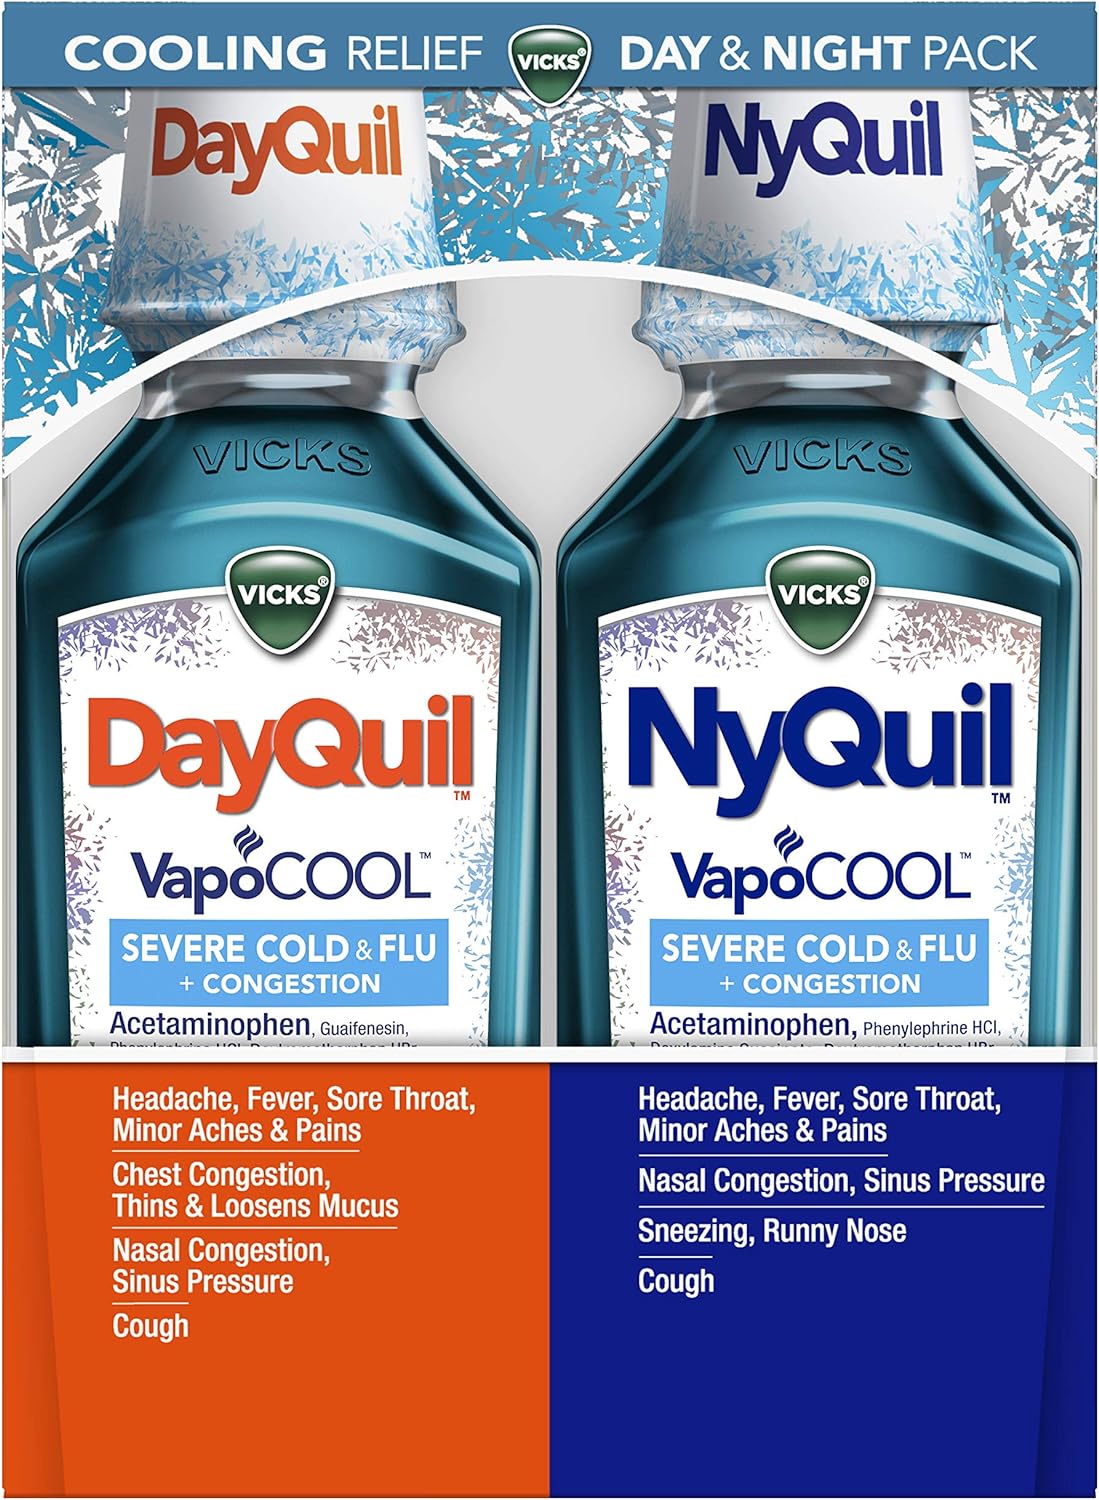 Vicks DayQuil and NyQuil VapoCOOL SEVERE Combo Cold & Flu + Congestion Medicine, Max Strength Relief For Fever, Sore Throat, Nasal Congestion, Sneezing, Cough, 2 x 12 oz Bottles, 1 NyQuil, 1 DayQuil